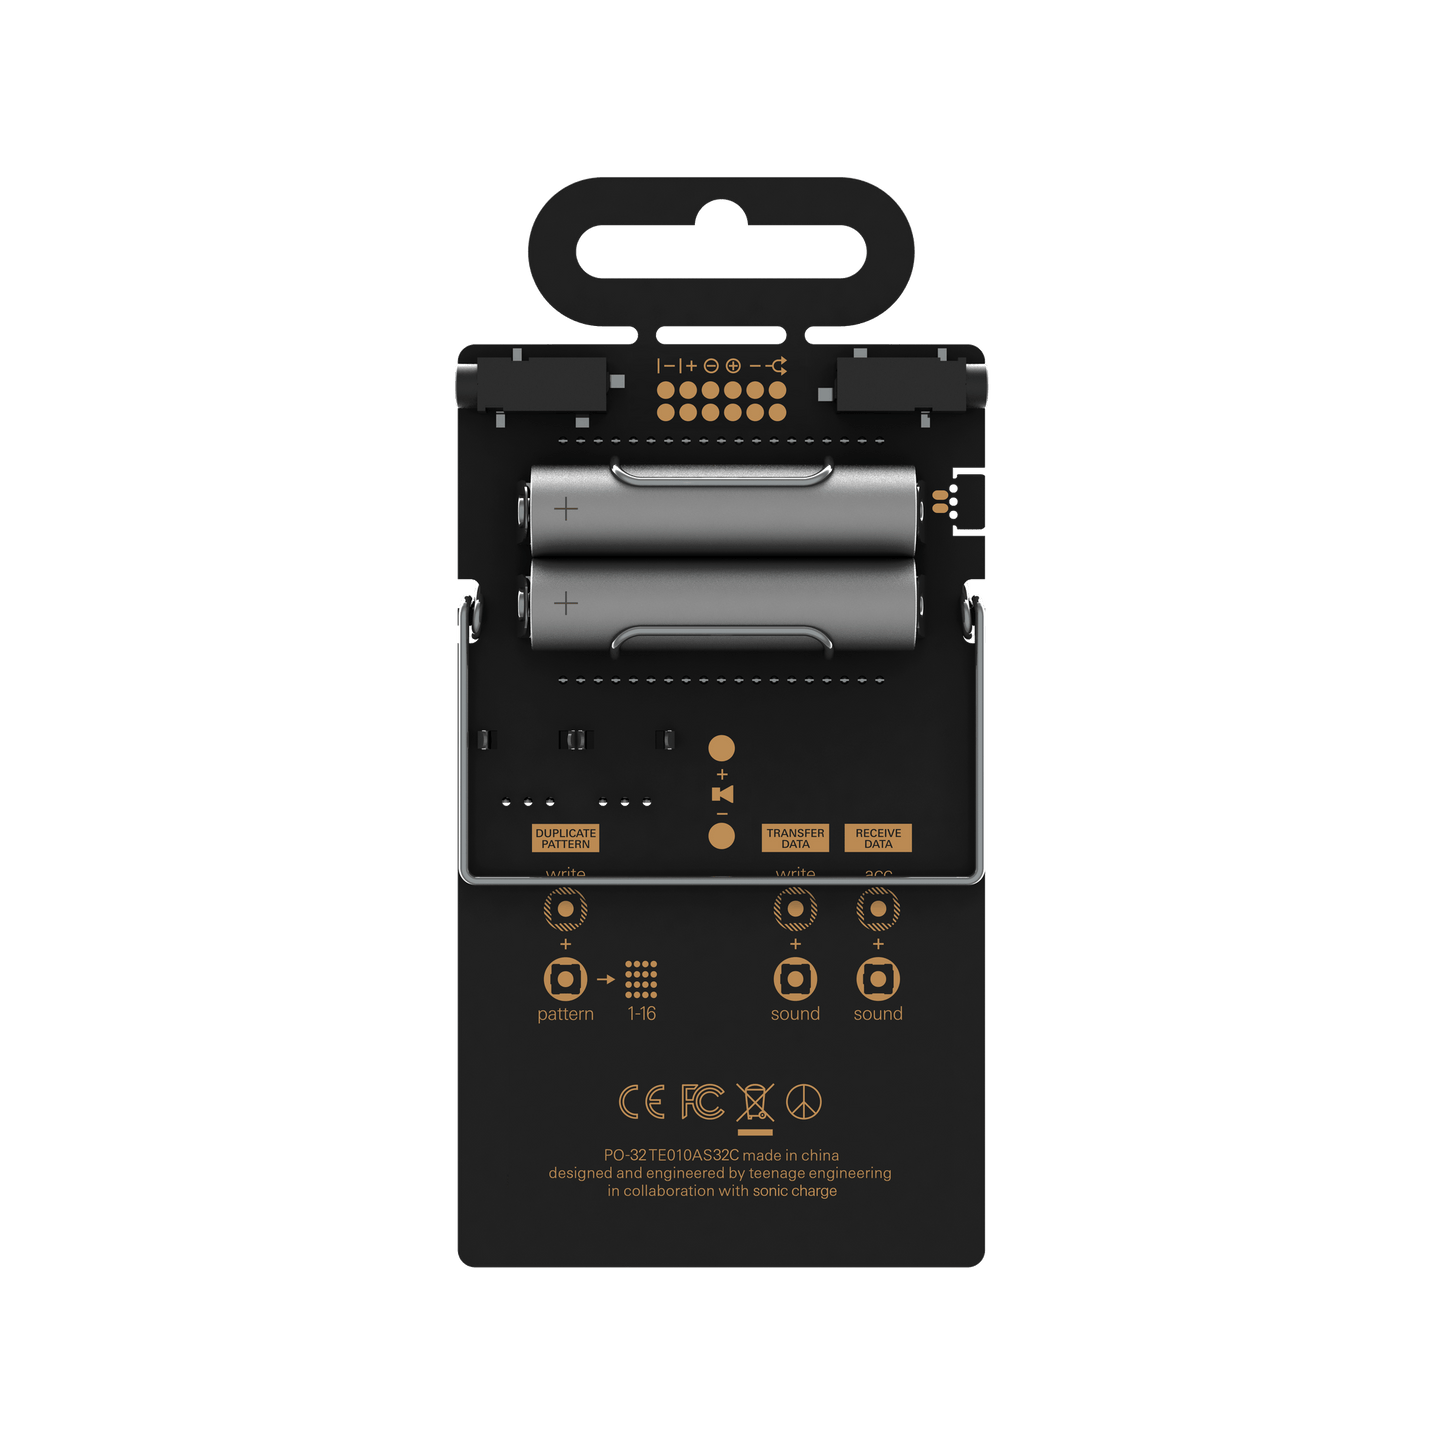 Teenage Engineering PO-32 Pocket Operator Tonic Drum Synthesizer and Sequencer back